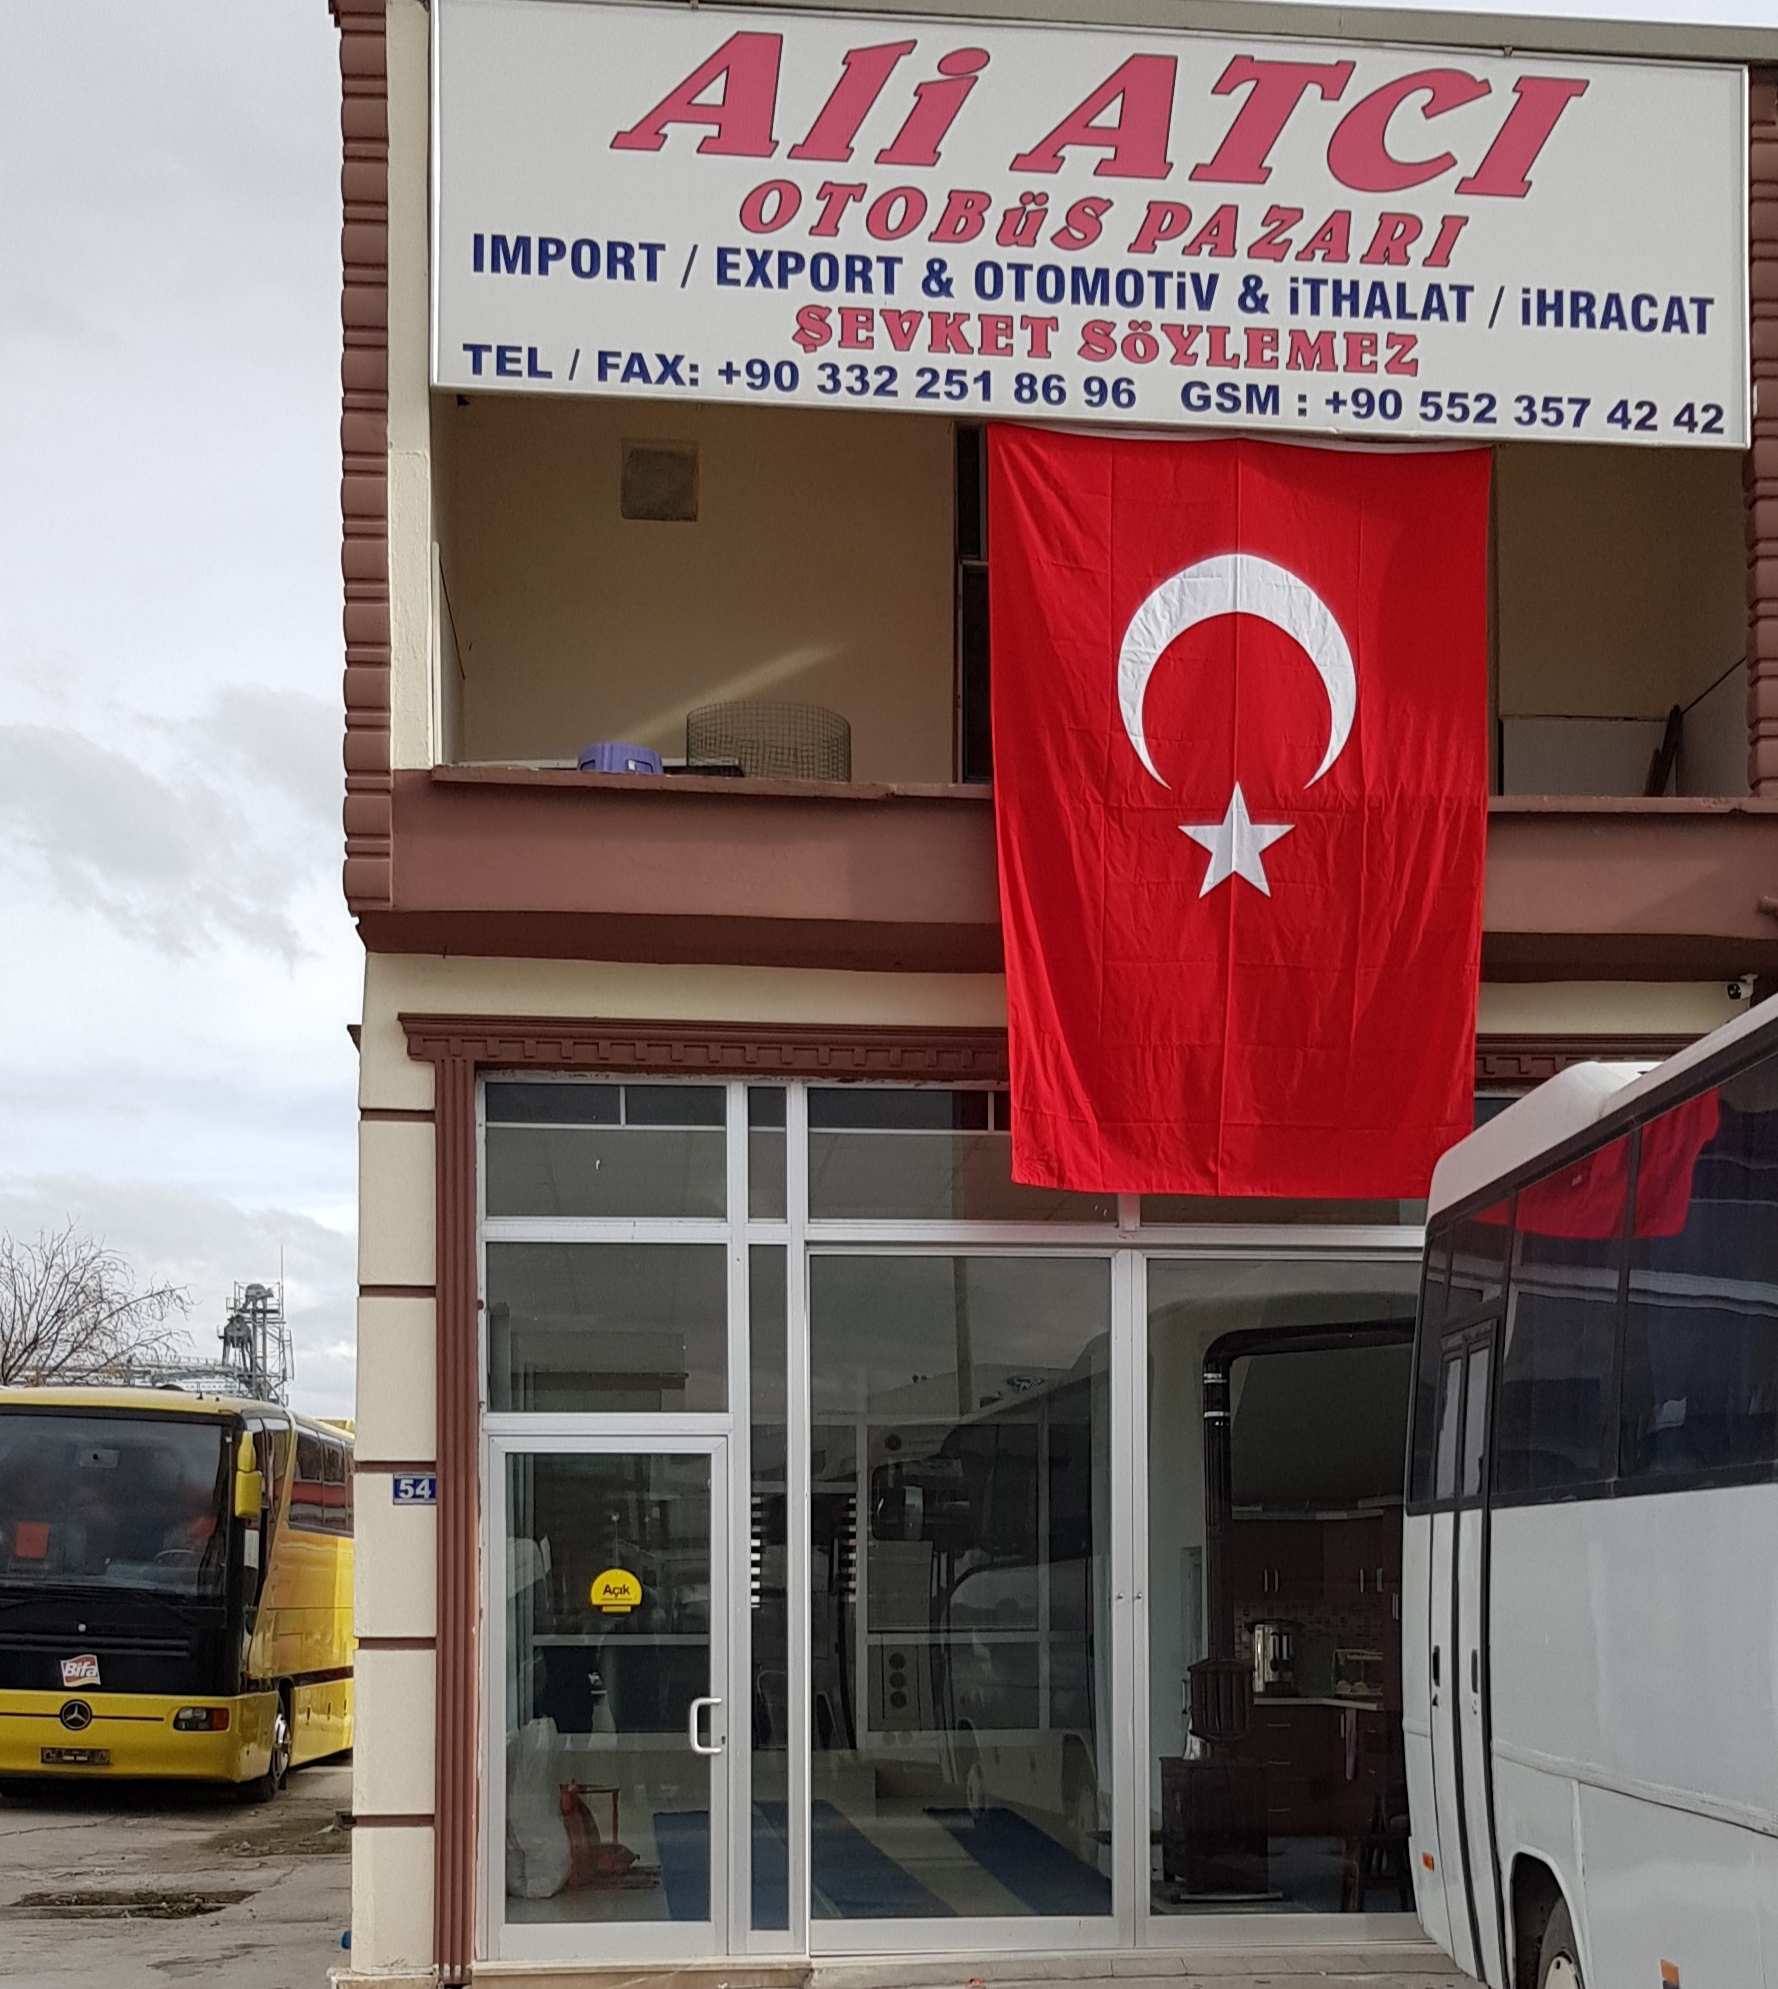 ALİ ATCI BUSSTORE undefined: photos 10